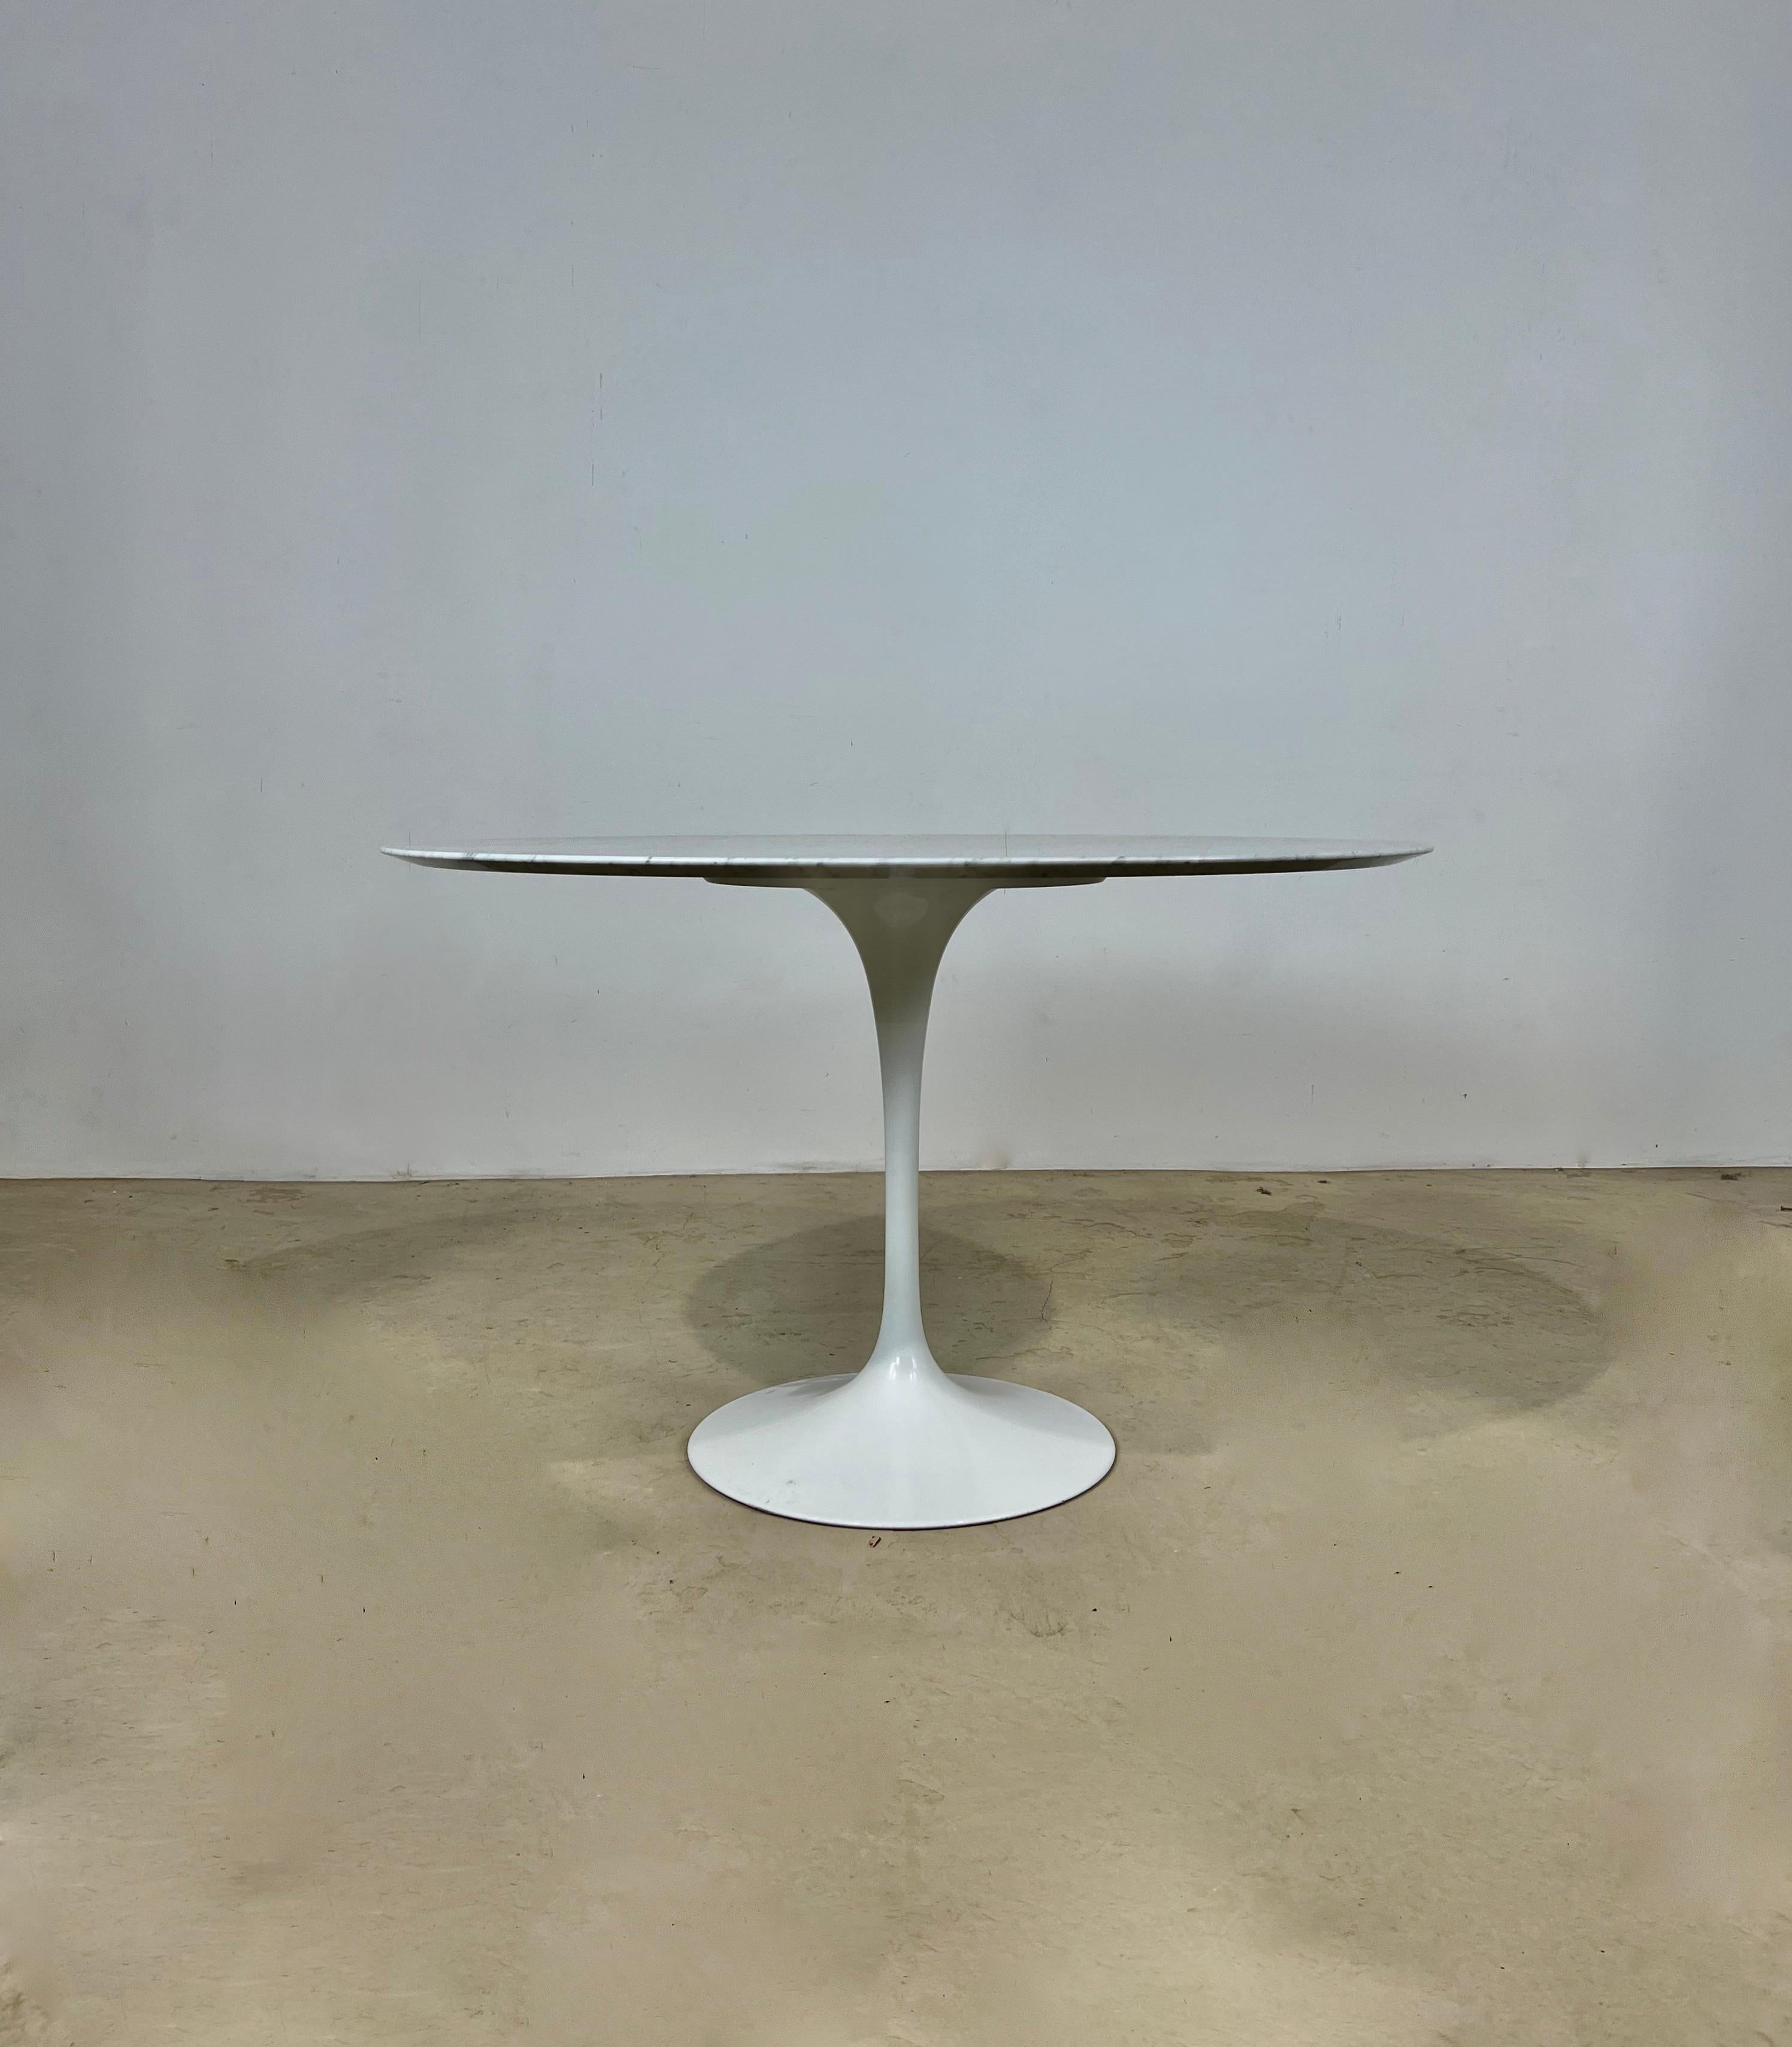 Carrara marble table. Foot stamped Knoll. Wear due to time and age of the table.